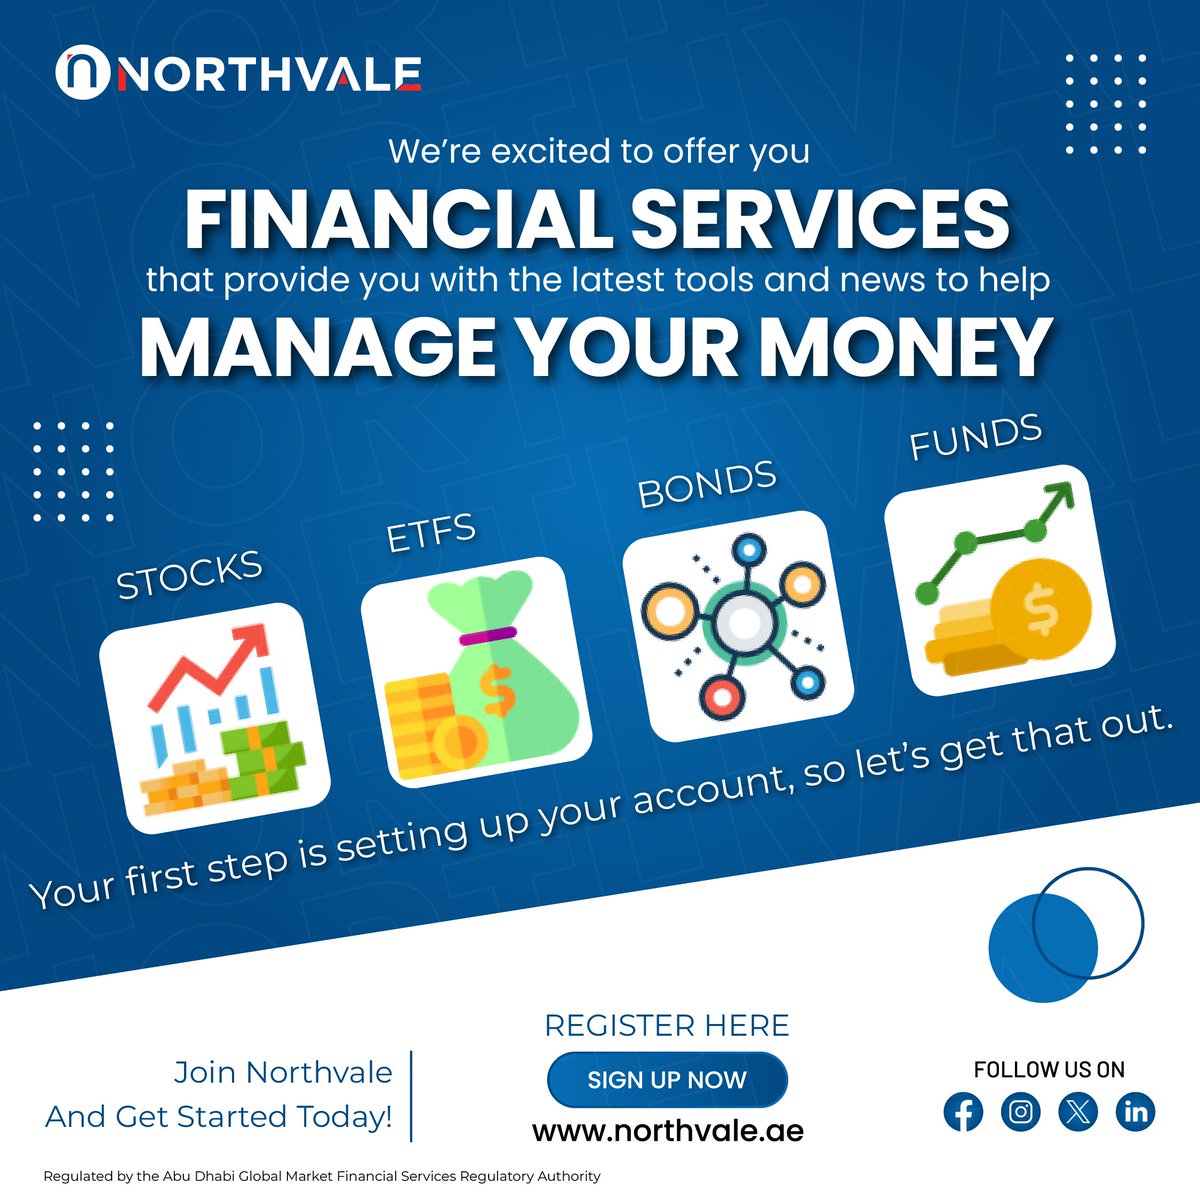 ❗️We're Excited to offer Stocks, ETFs, Bonds, and Funds—all at your fingertips.

Take your first step by setting up your account with us today at northvale.ae

#Northvale #eTrading #TradingPlatform #financialservices #stockmarkets #financialfreedom #investing #global